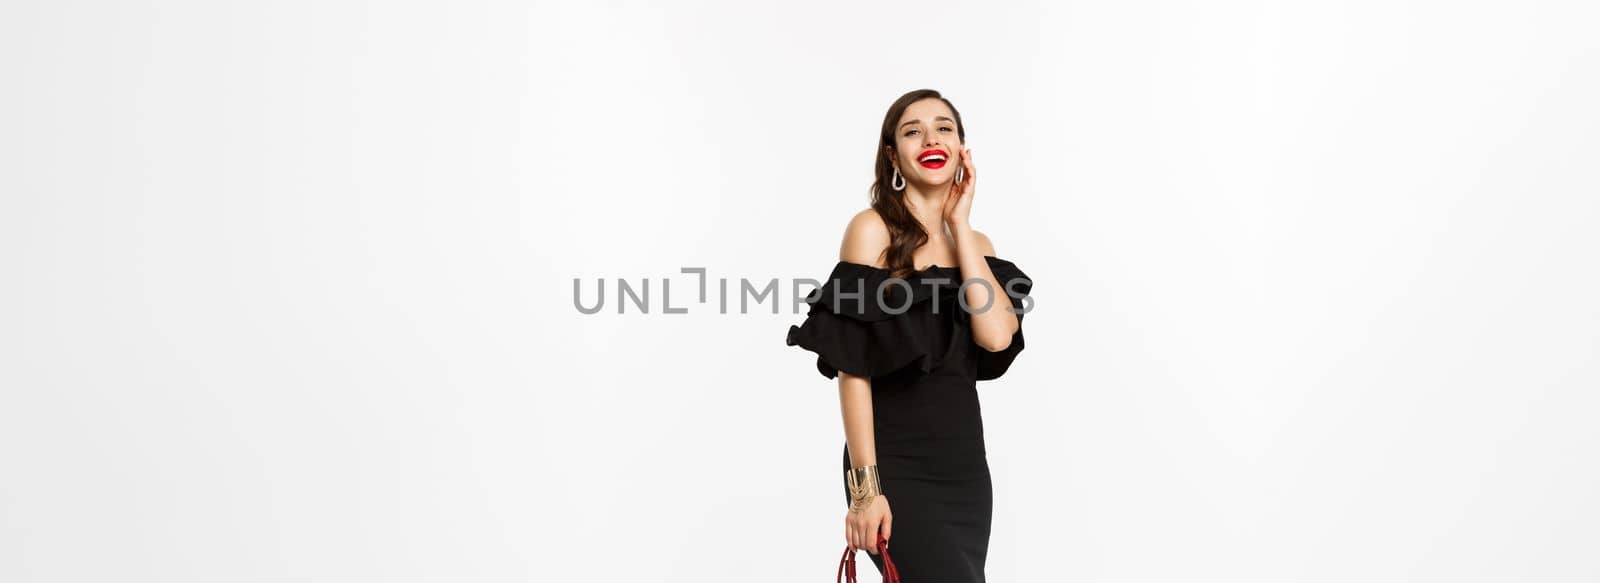 Beauty and fashion concept. Full length of beautiful young lady going on party in heels, black dress and makeup, holding elegant purse, laughing at camera, white background.